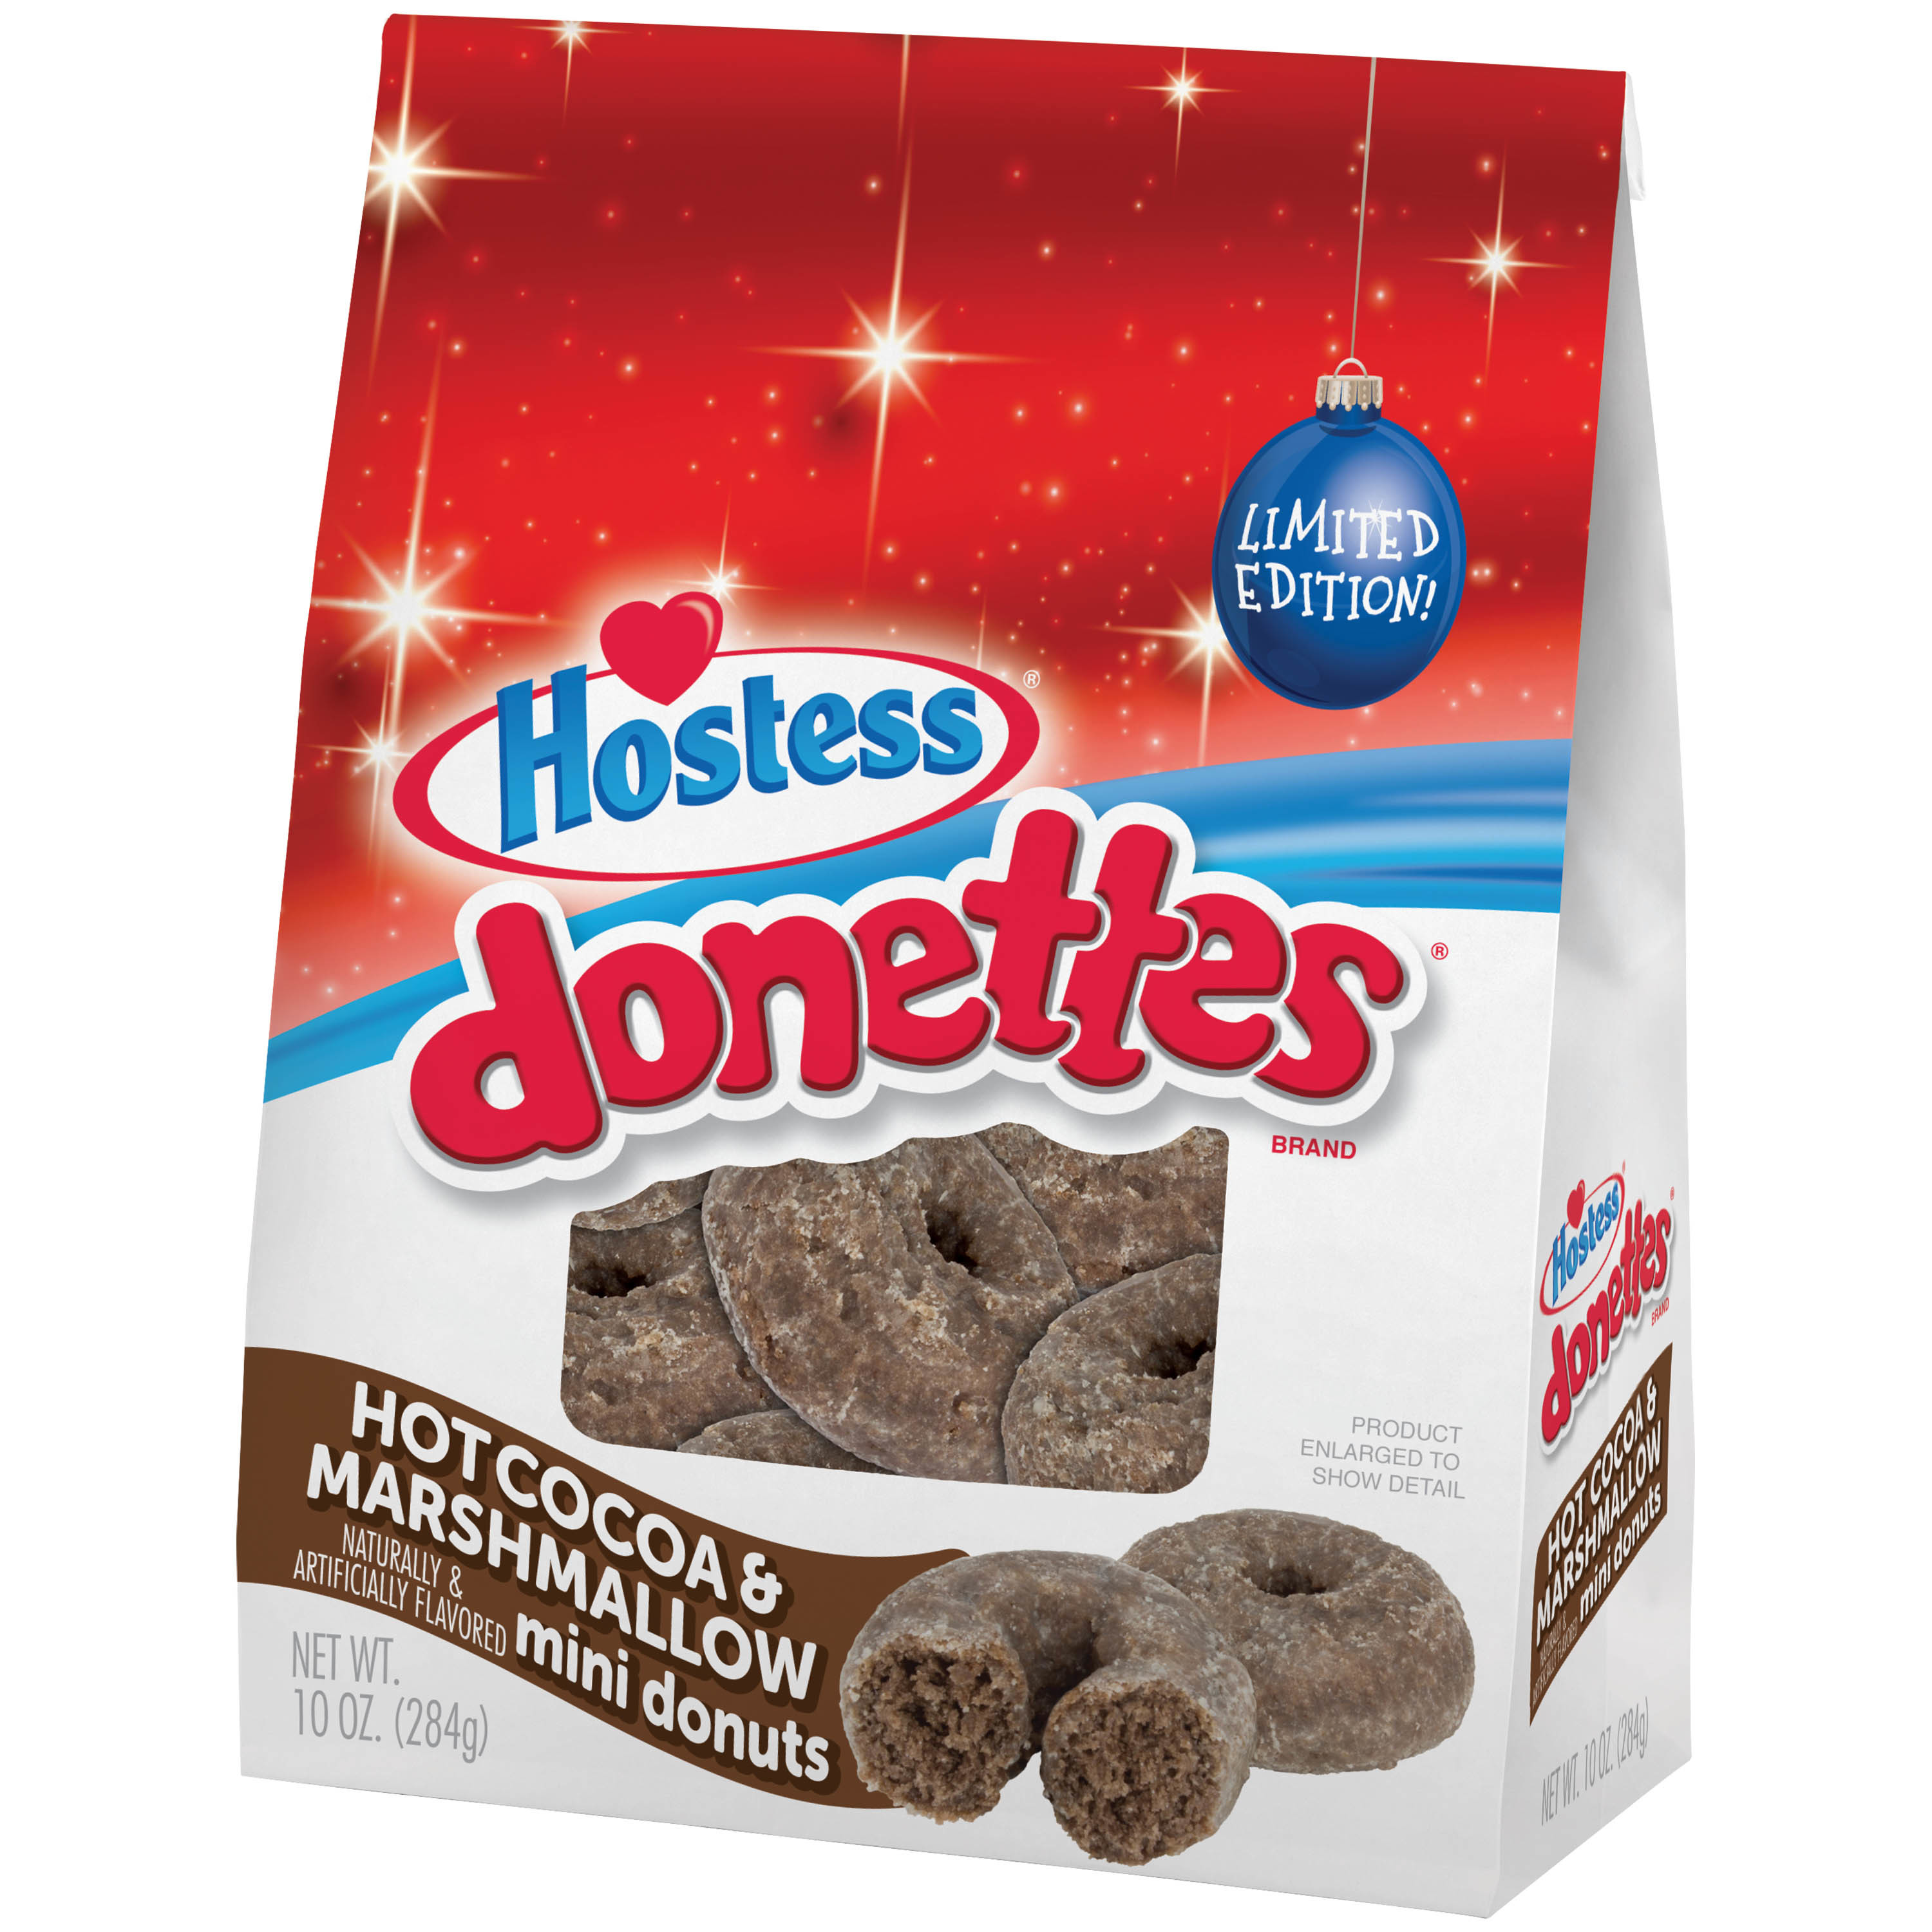 HOSTESS Hot Cocoa & Marshmallow Flavored DONETTES Donuts Bag, 10 oz - image 3 of 10